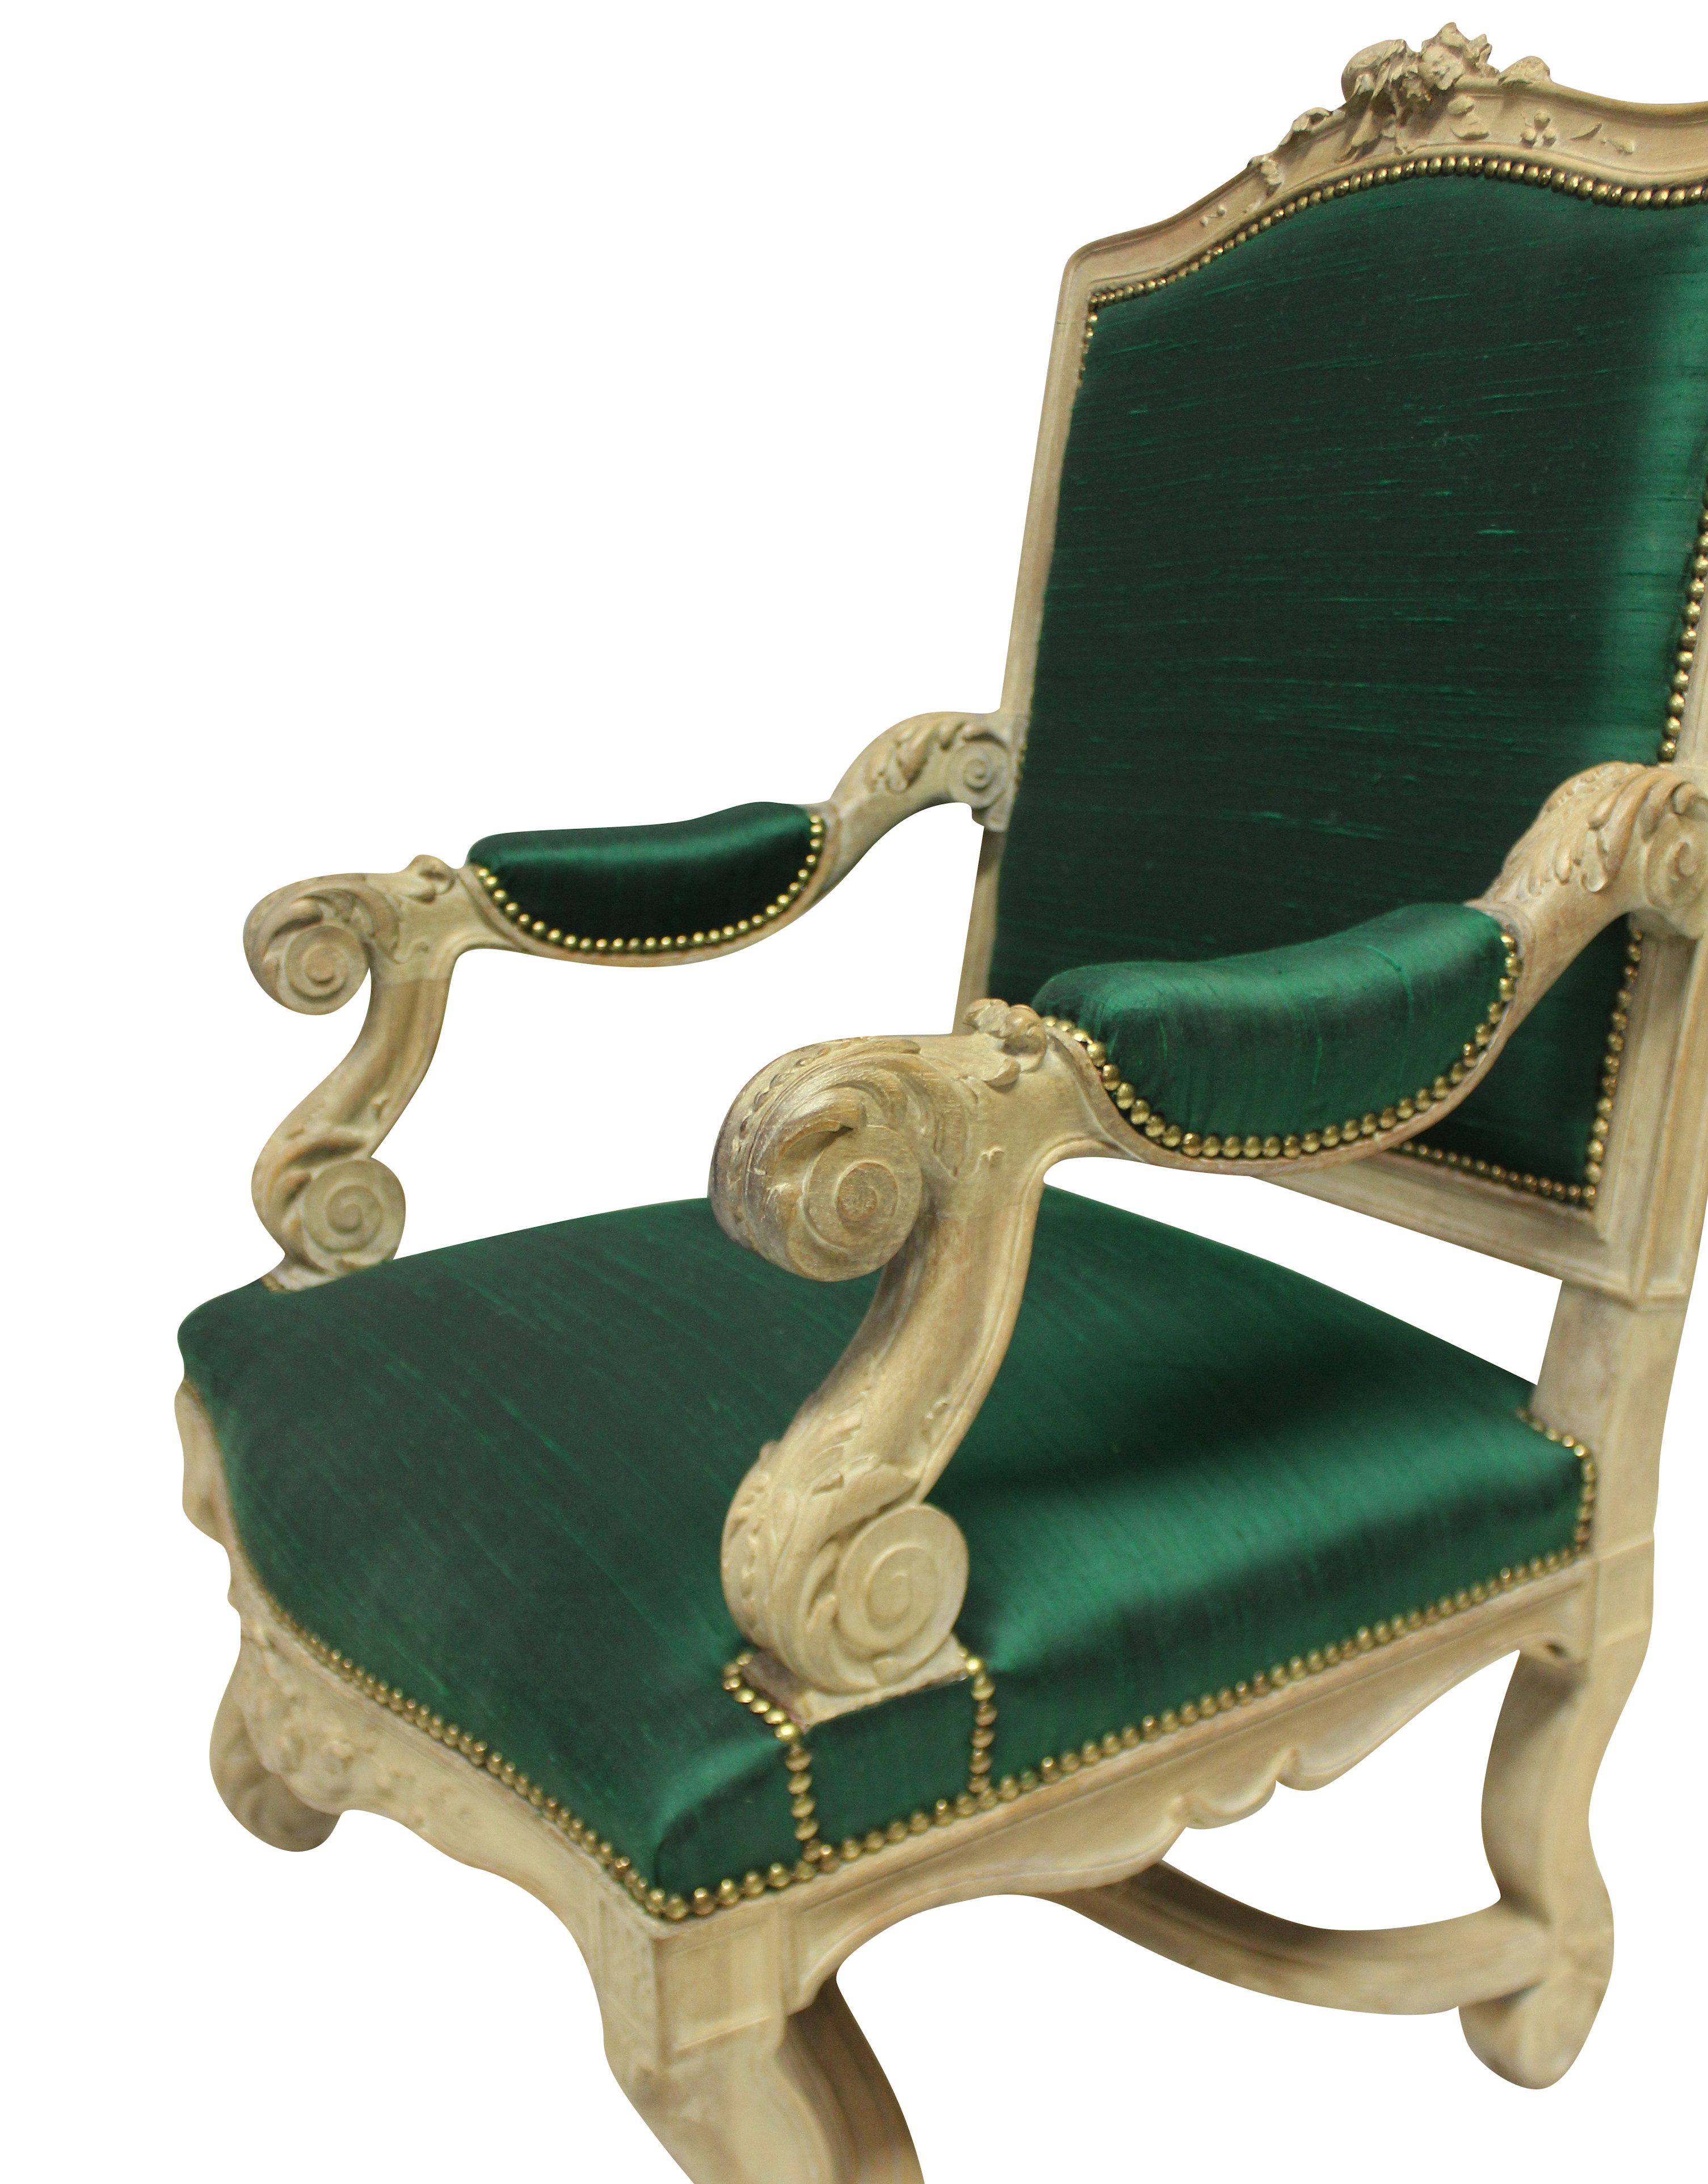 A French Louis XIV style armchair in nicely carved pickled oak. Newly upholstered in textured emerald silk.